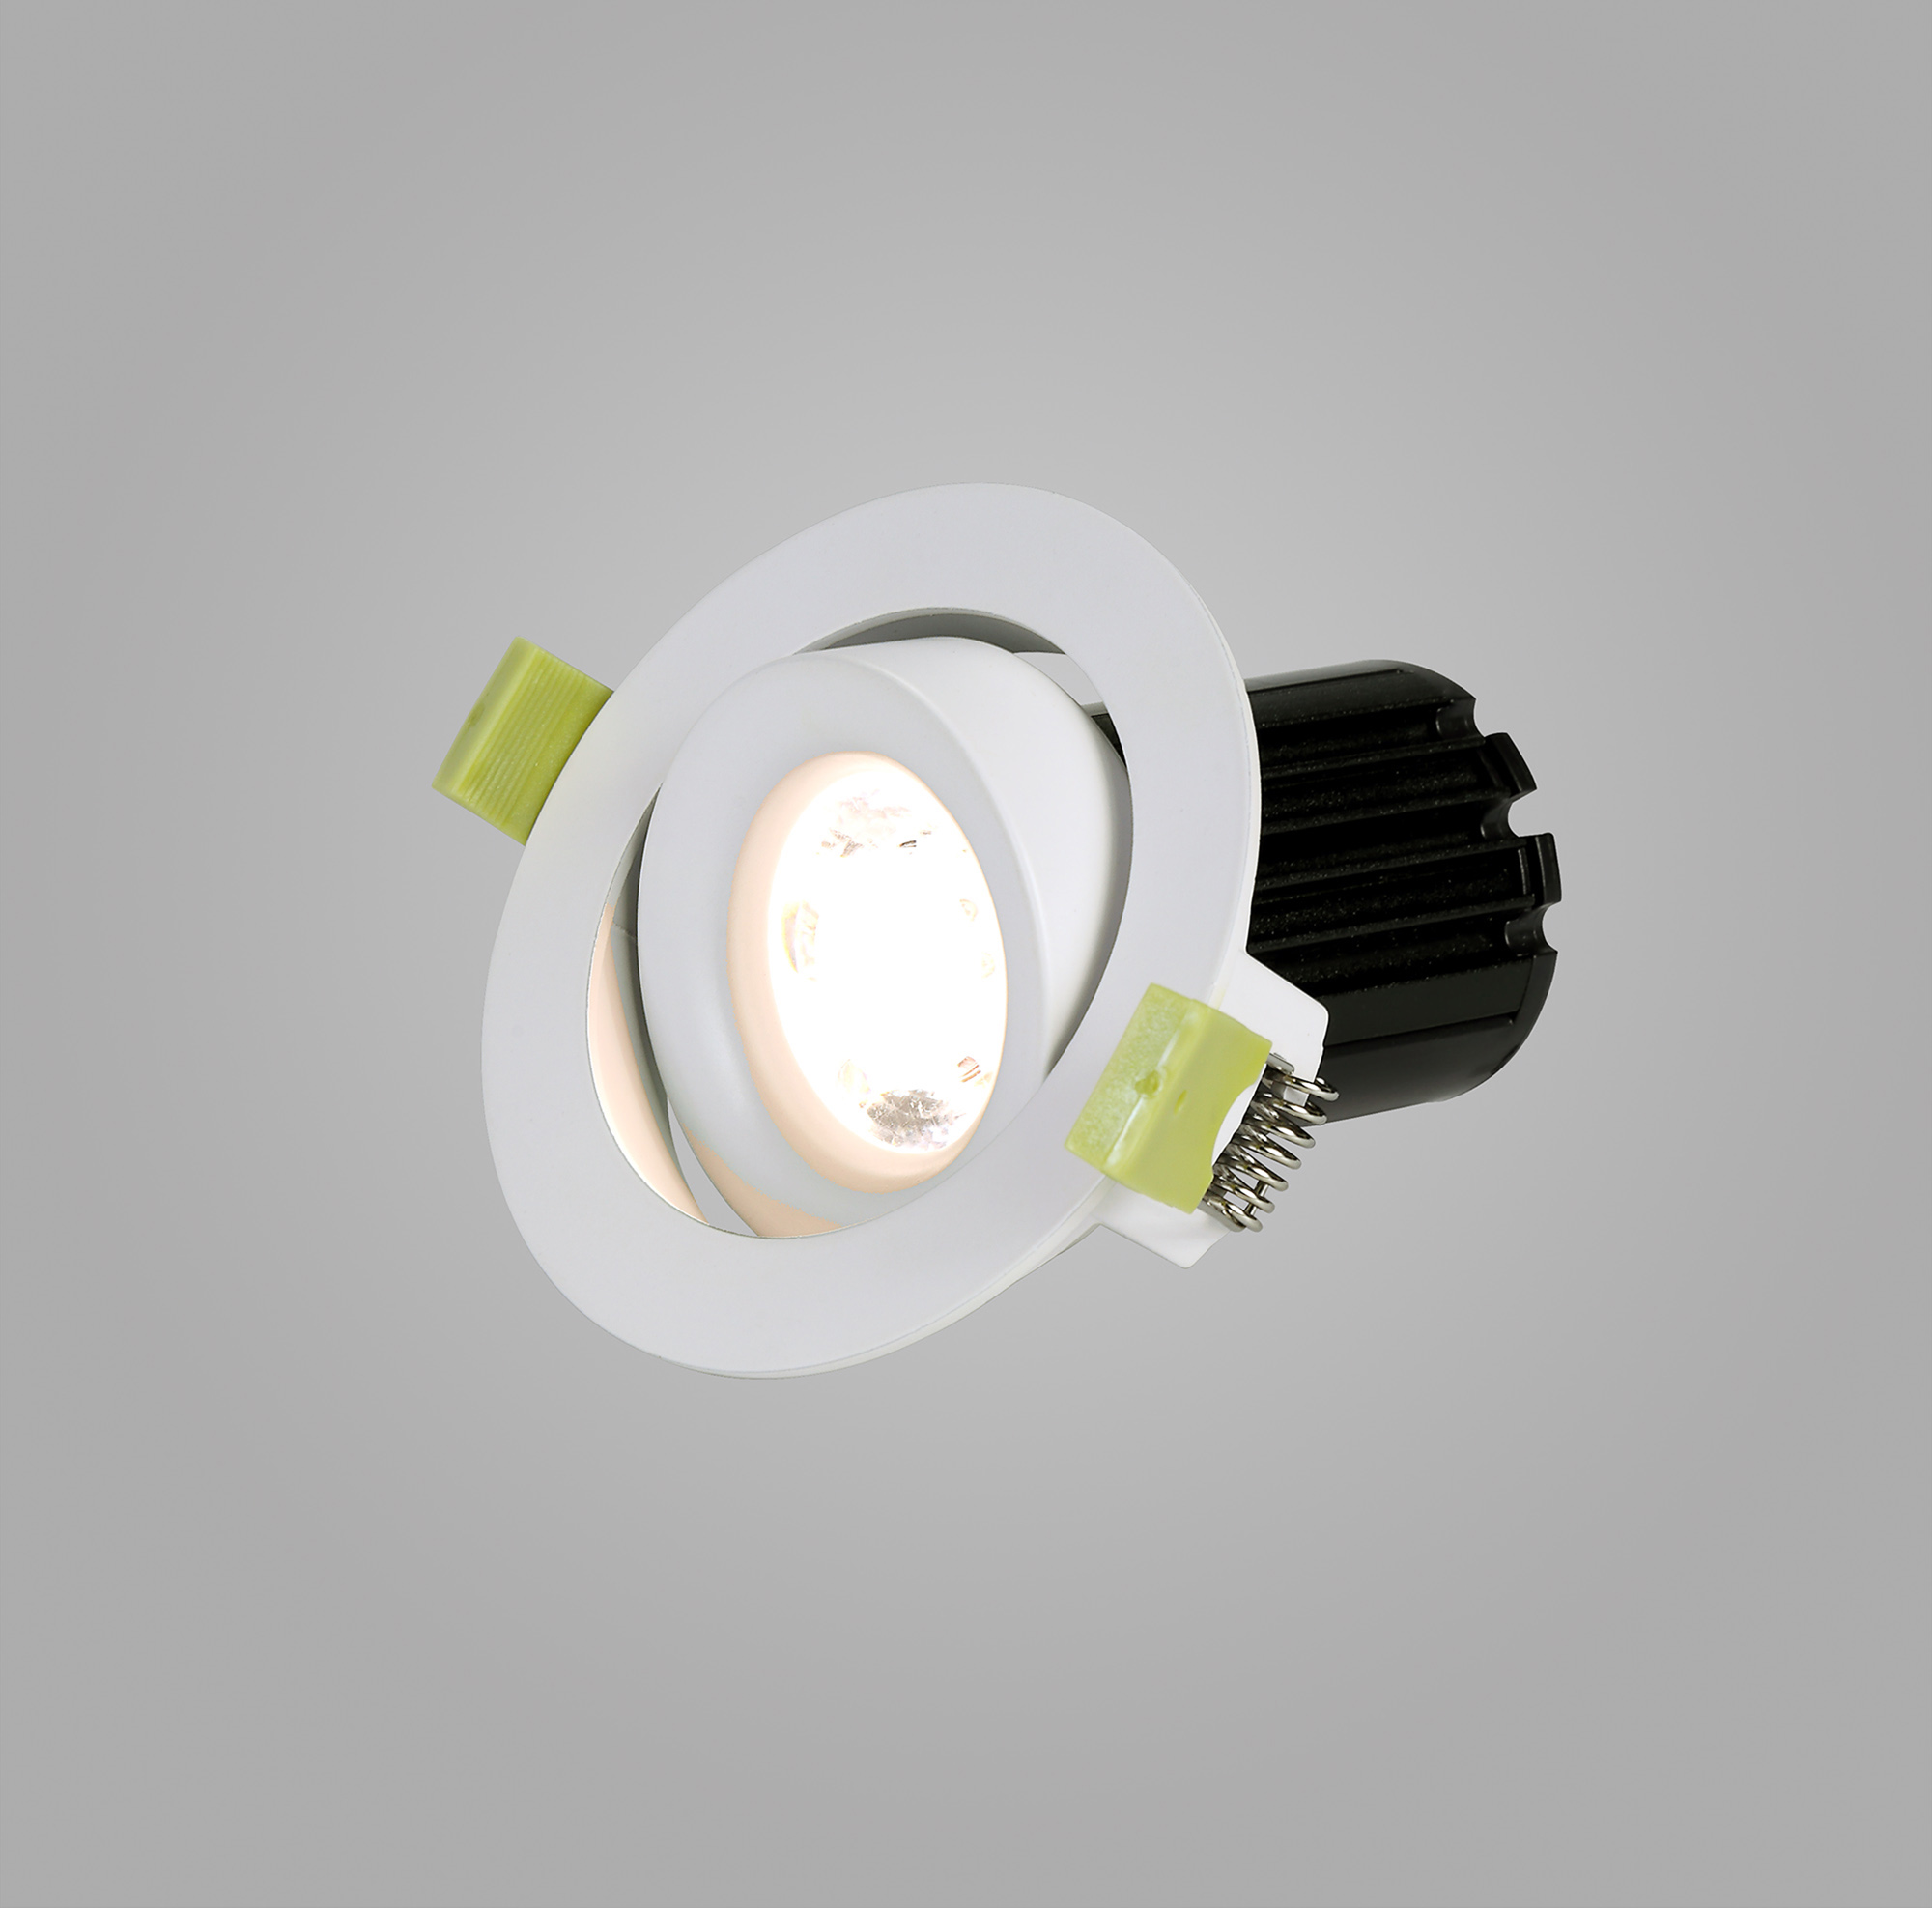 Bruve A 10 Recessed Ceiling Luminaires Dlux Round Recess Ceiling